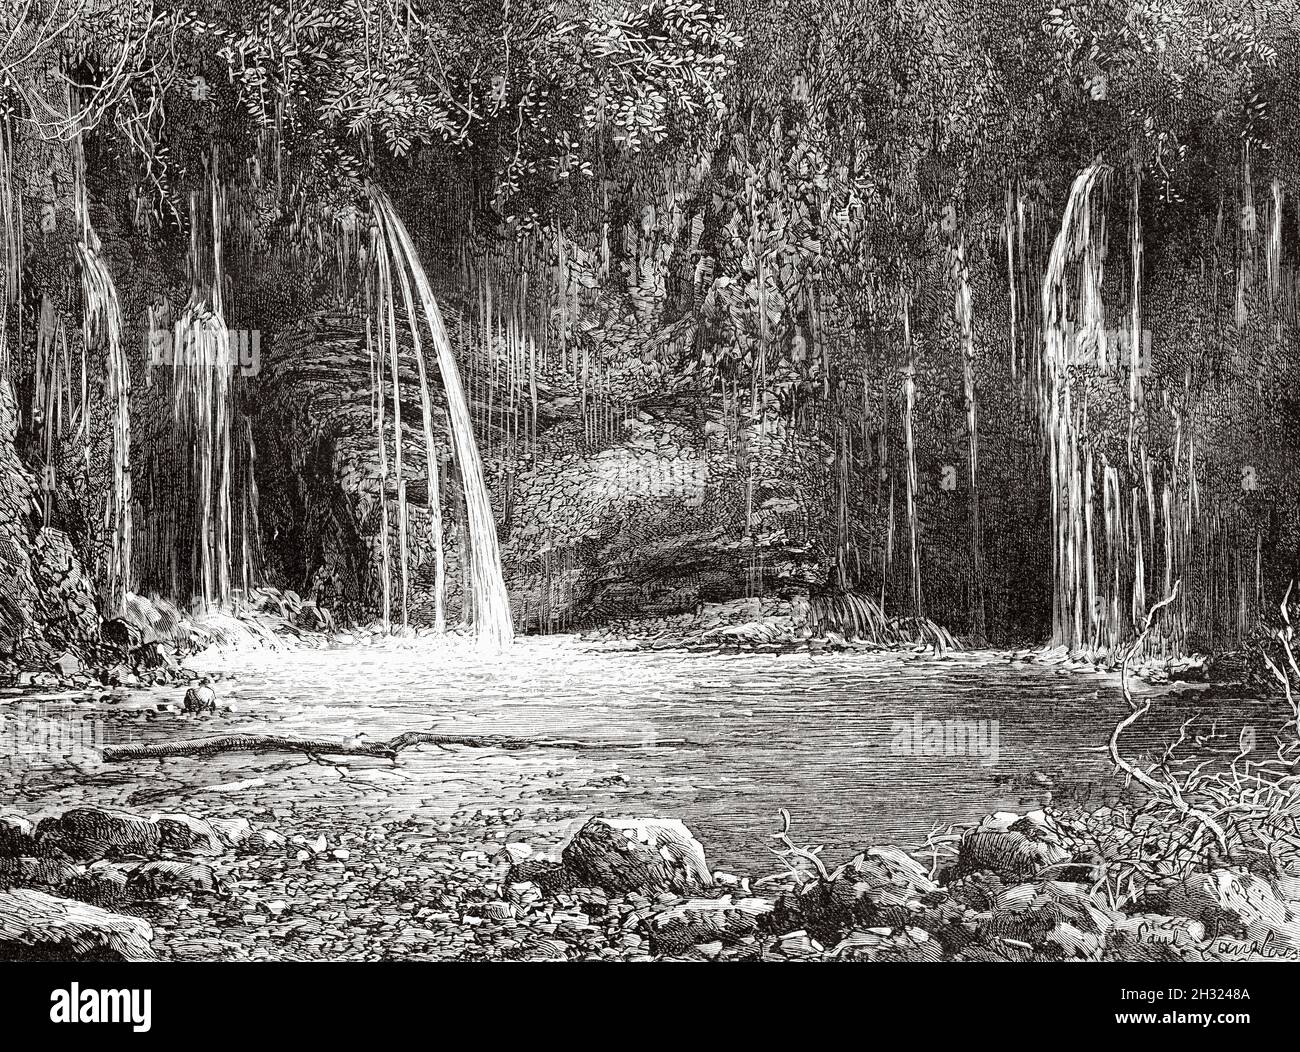 Levada das 25 fontes. 25 fountains waterfall, Madeira Natural Park. Rabacal, Madeira Island, Portugal. Europe. Old 19th century engraved illustration Madeira Island by Marquis Degli Albizzi from Le Tour du Monde 1889 Stock Photo